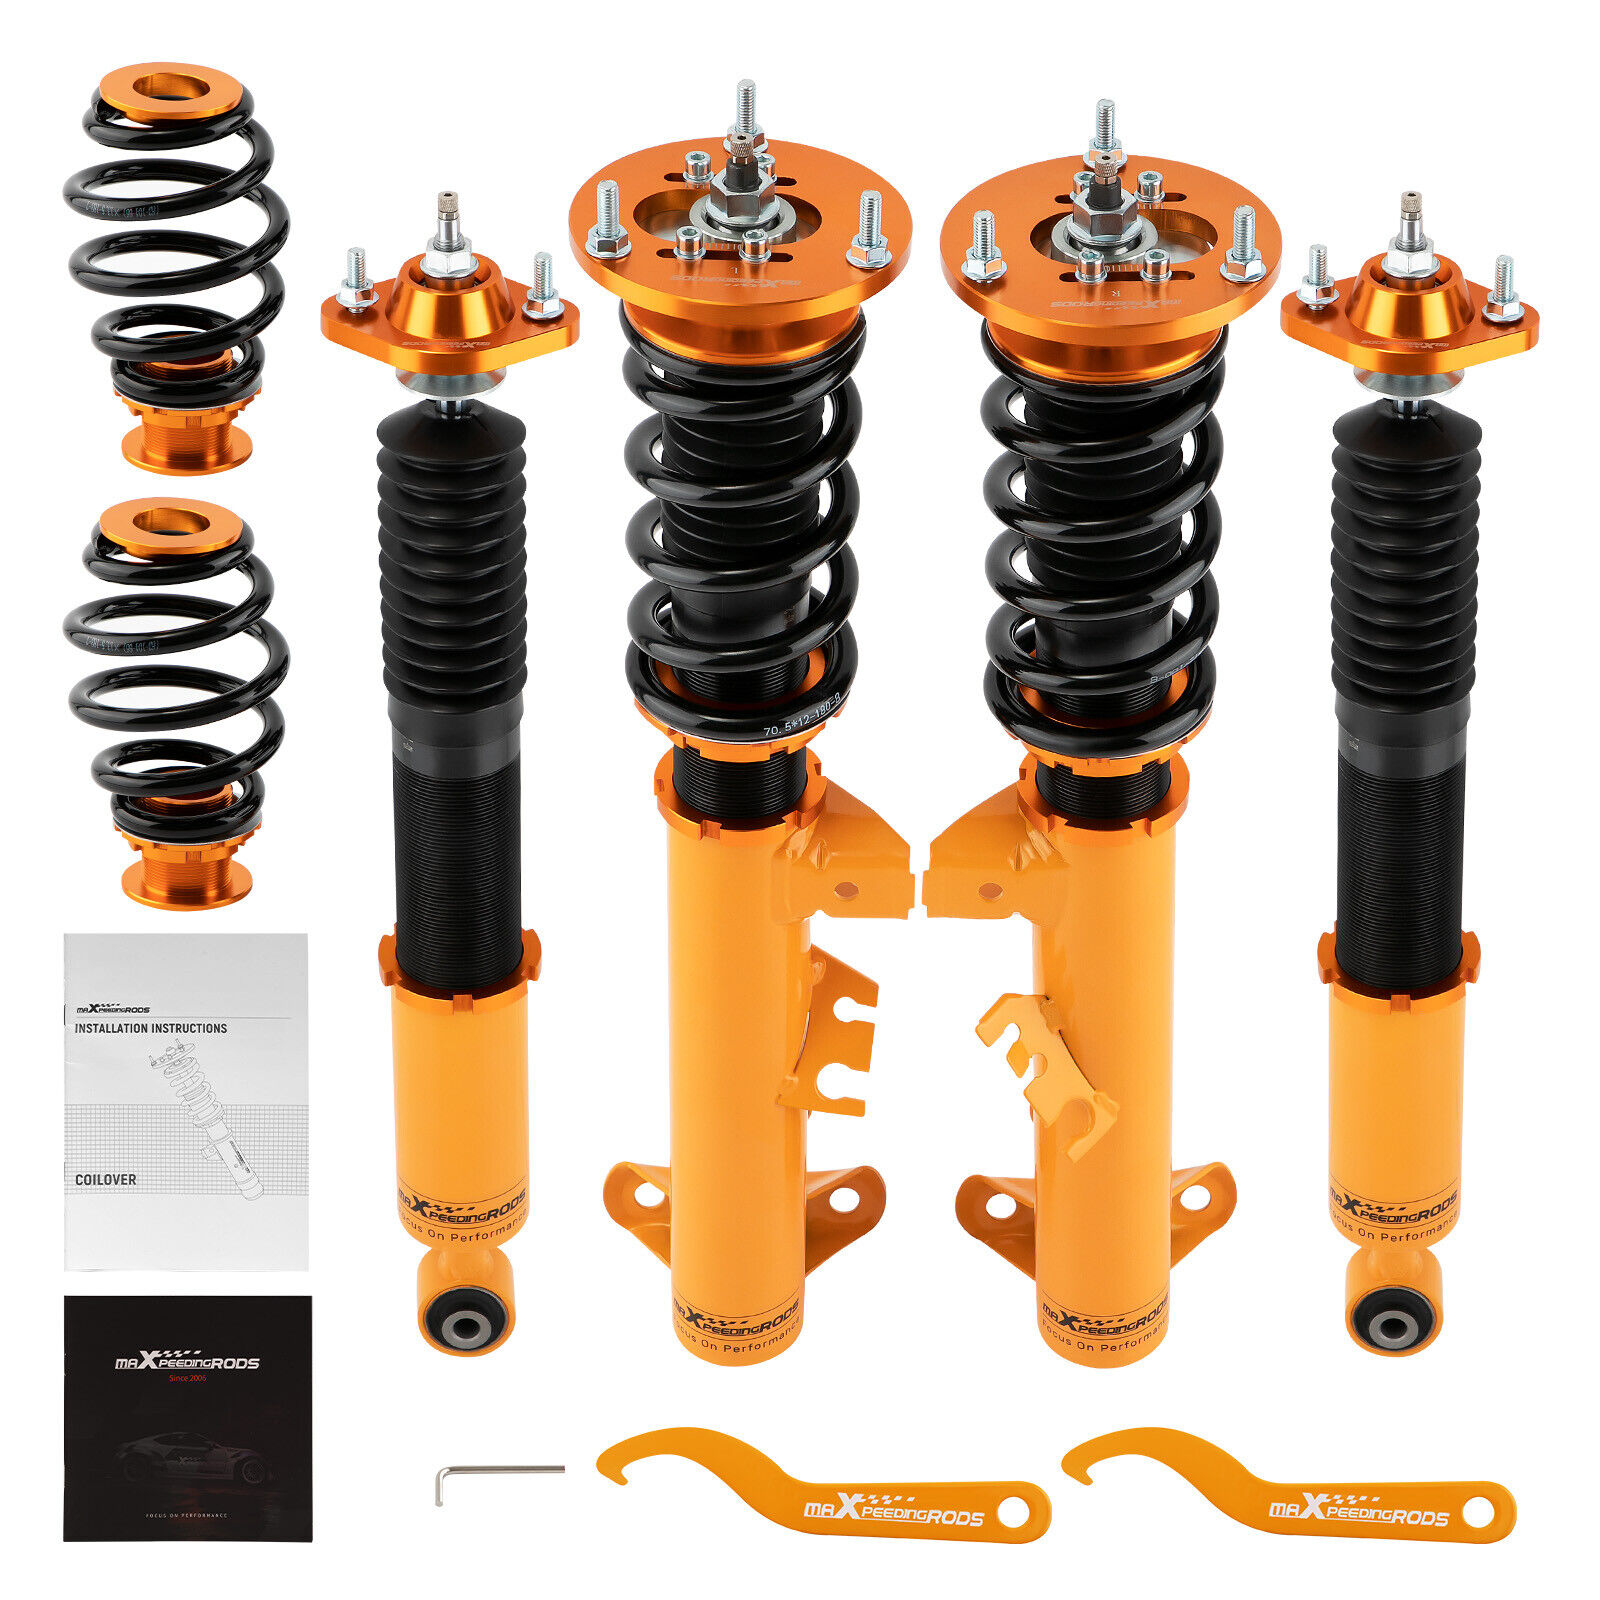 24 Way Damper Coilovers Struts Kit for BMW 3 Series E36 318 323 325 Sedan Coupe